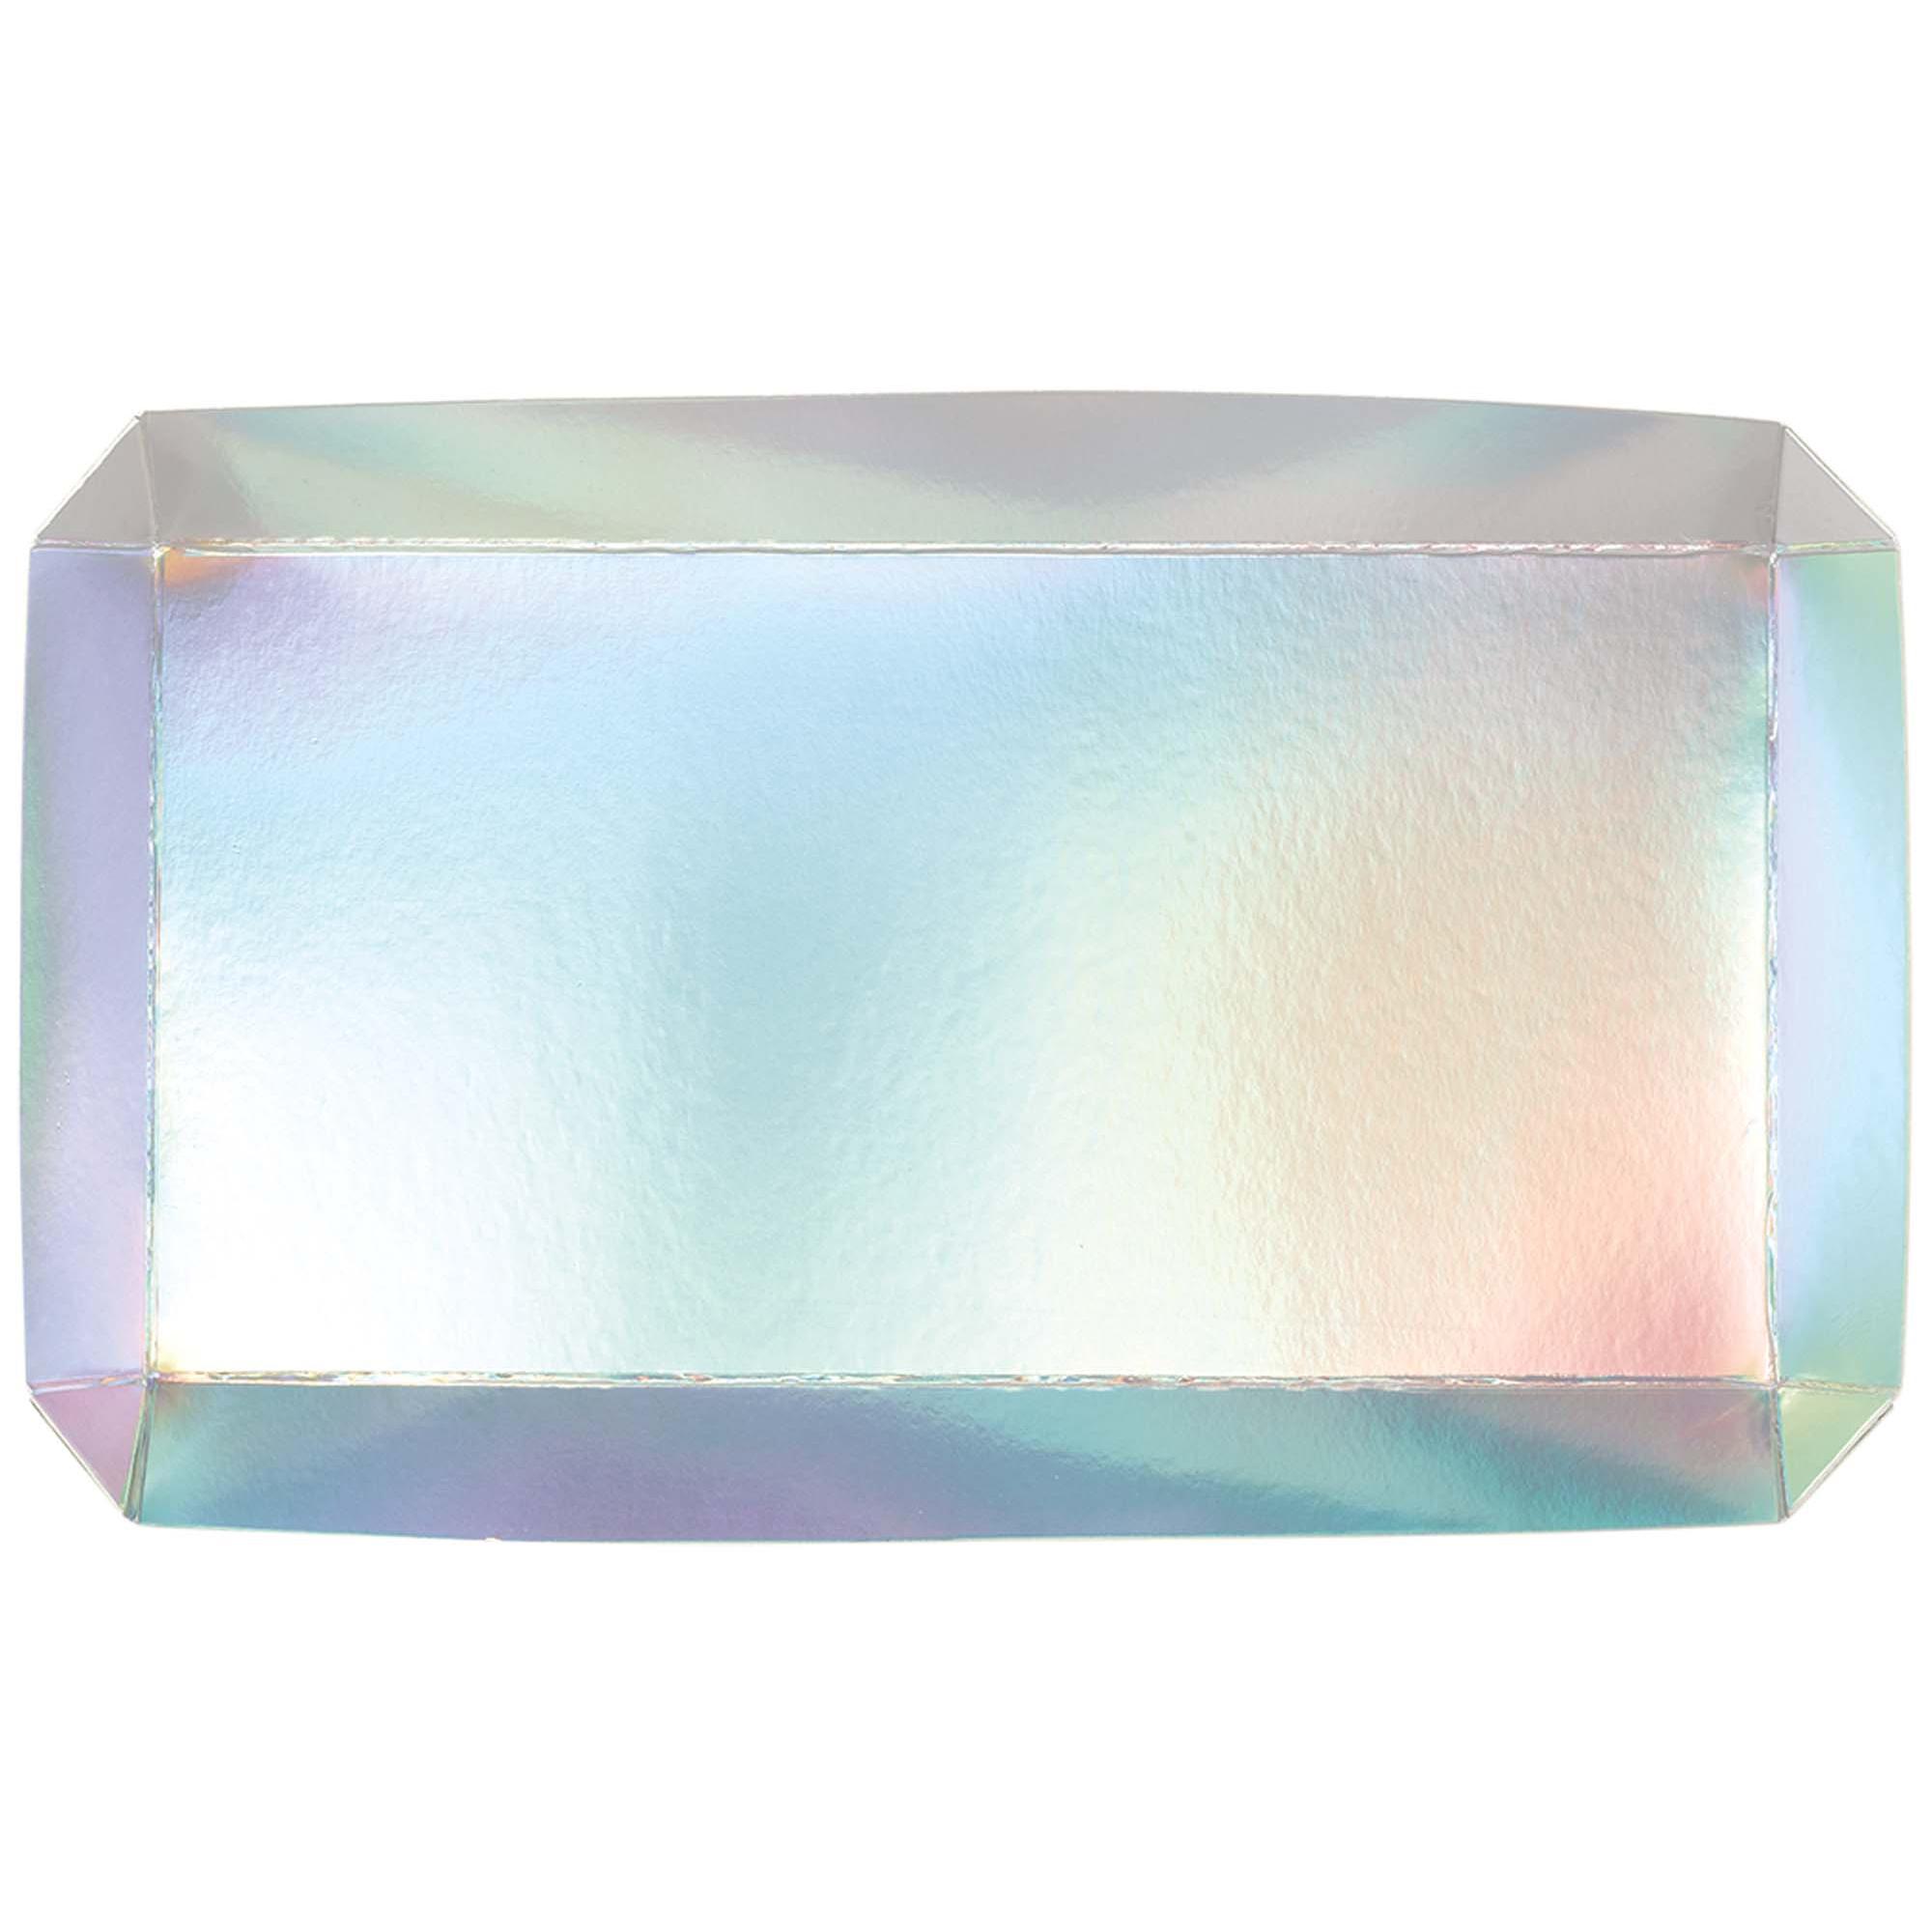 Shimmering Party Iridescent Paper Trays 2pcs Printed Tableware - Party Centre